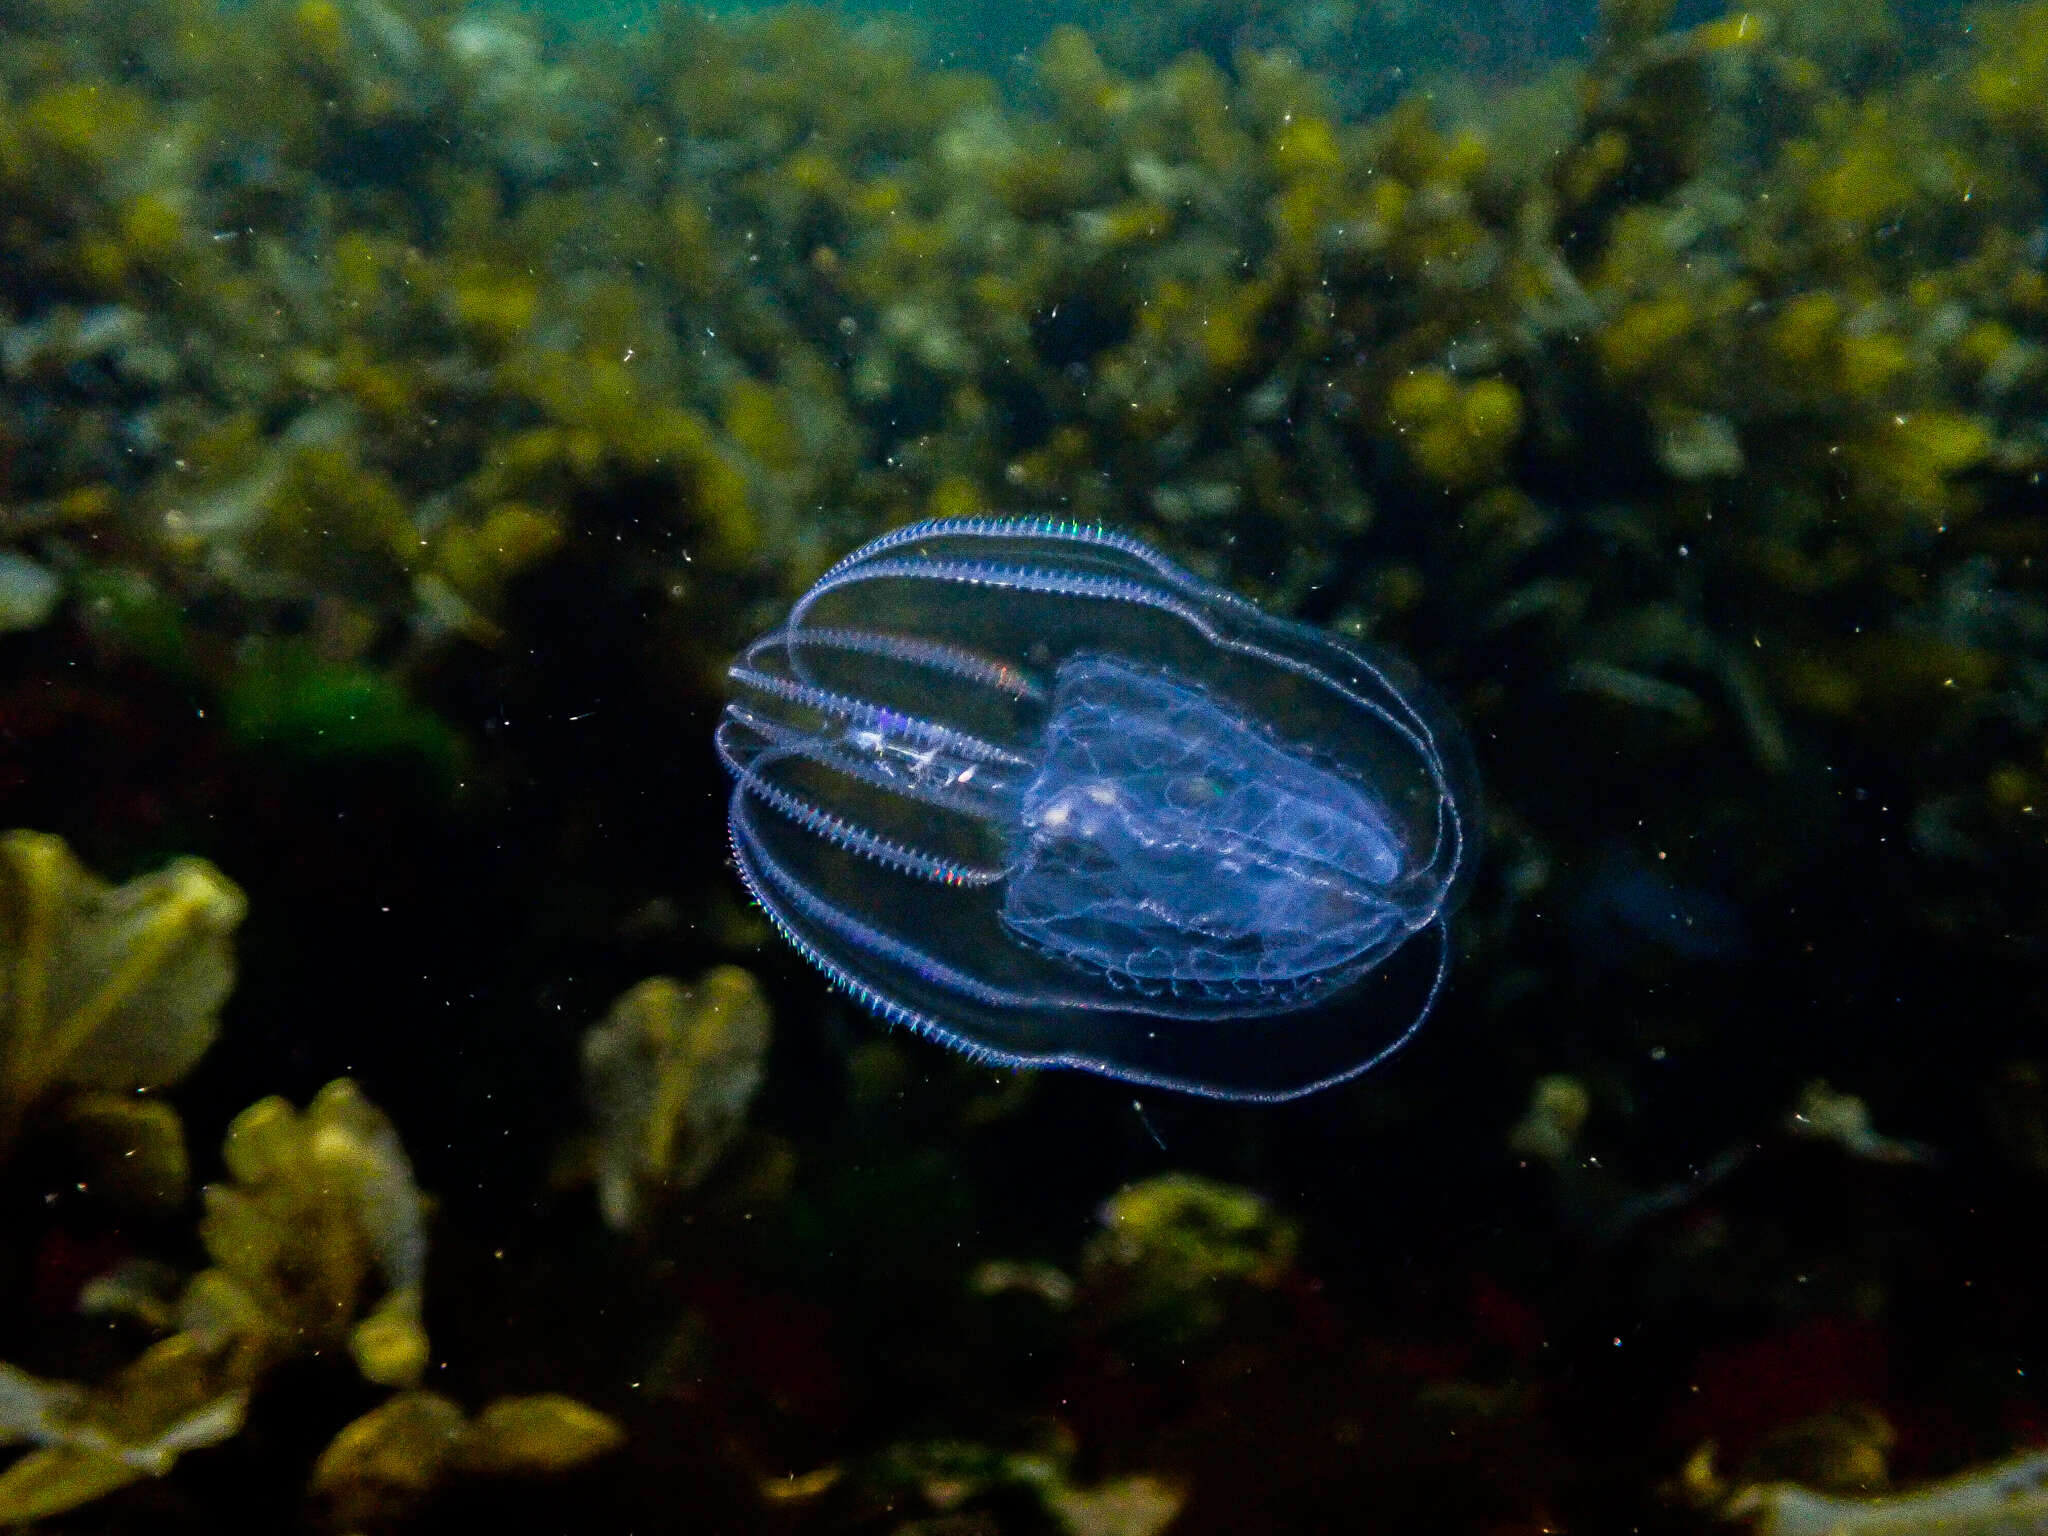 Image of common northern comb jelly